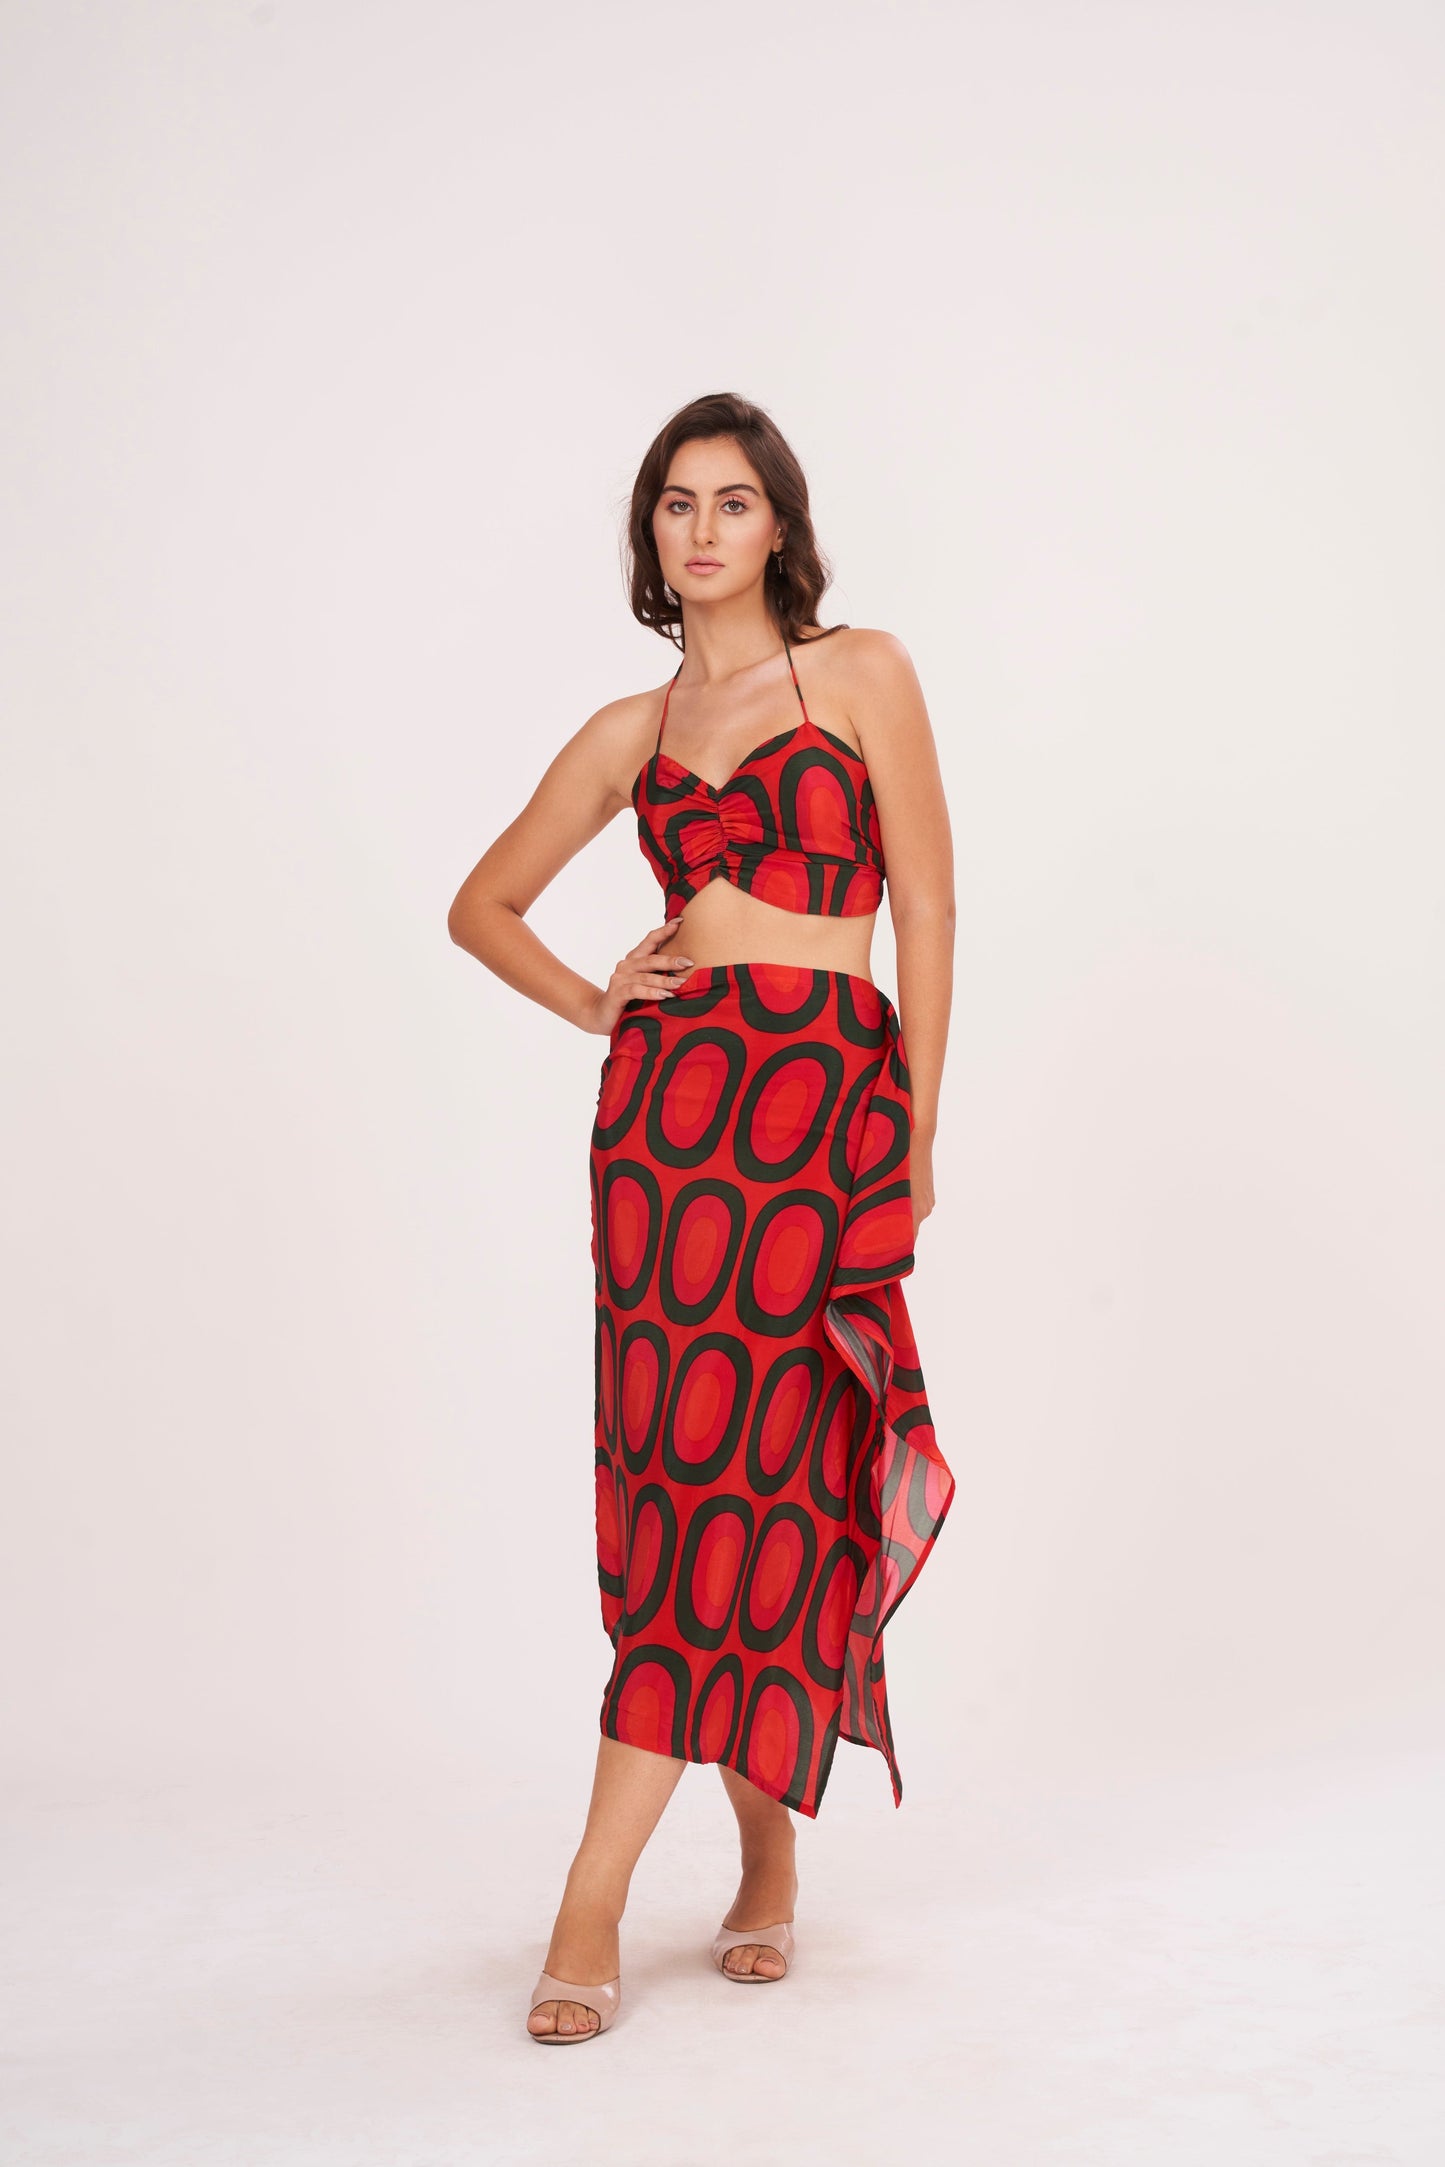 A stunning long skirt with a slit and cascading ruffles, offering a flirty and fun look while accentuating the silhouette, made from high-quality crepe.